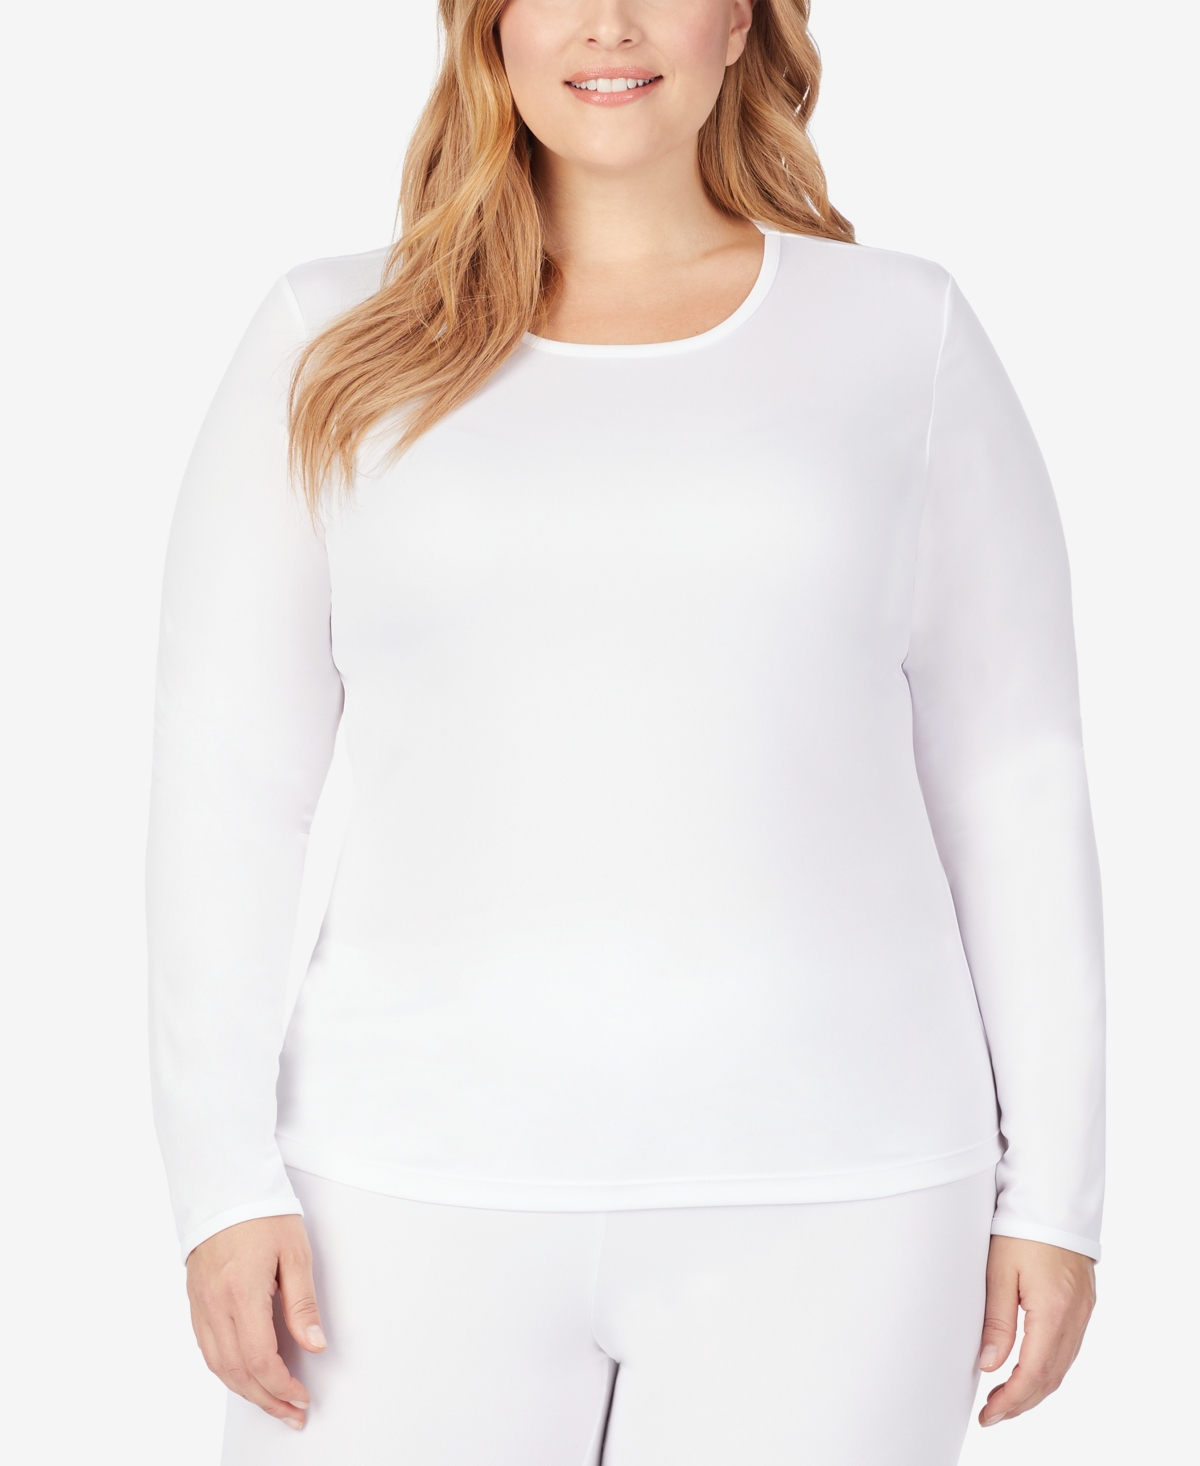 Cuddl Duds Plus Size Climatesmart Top In White